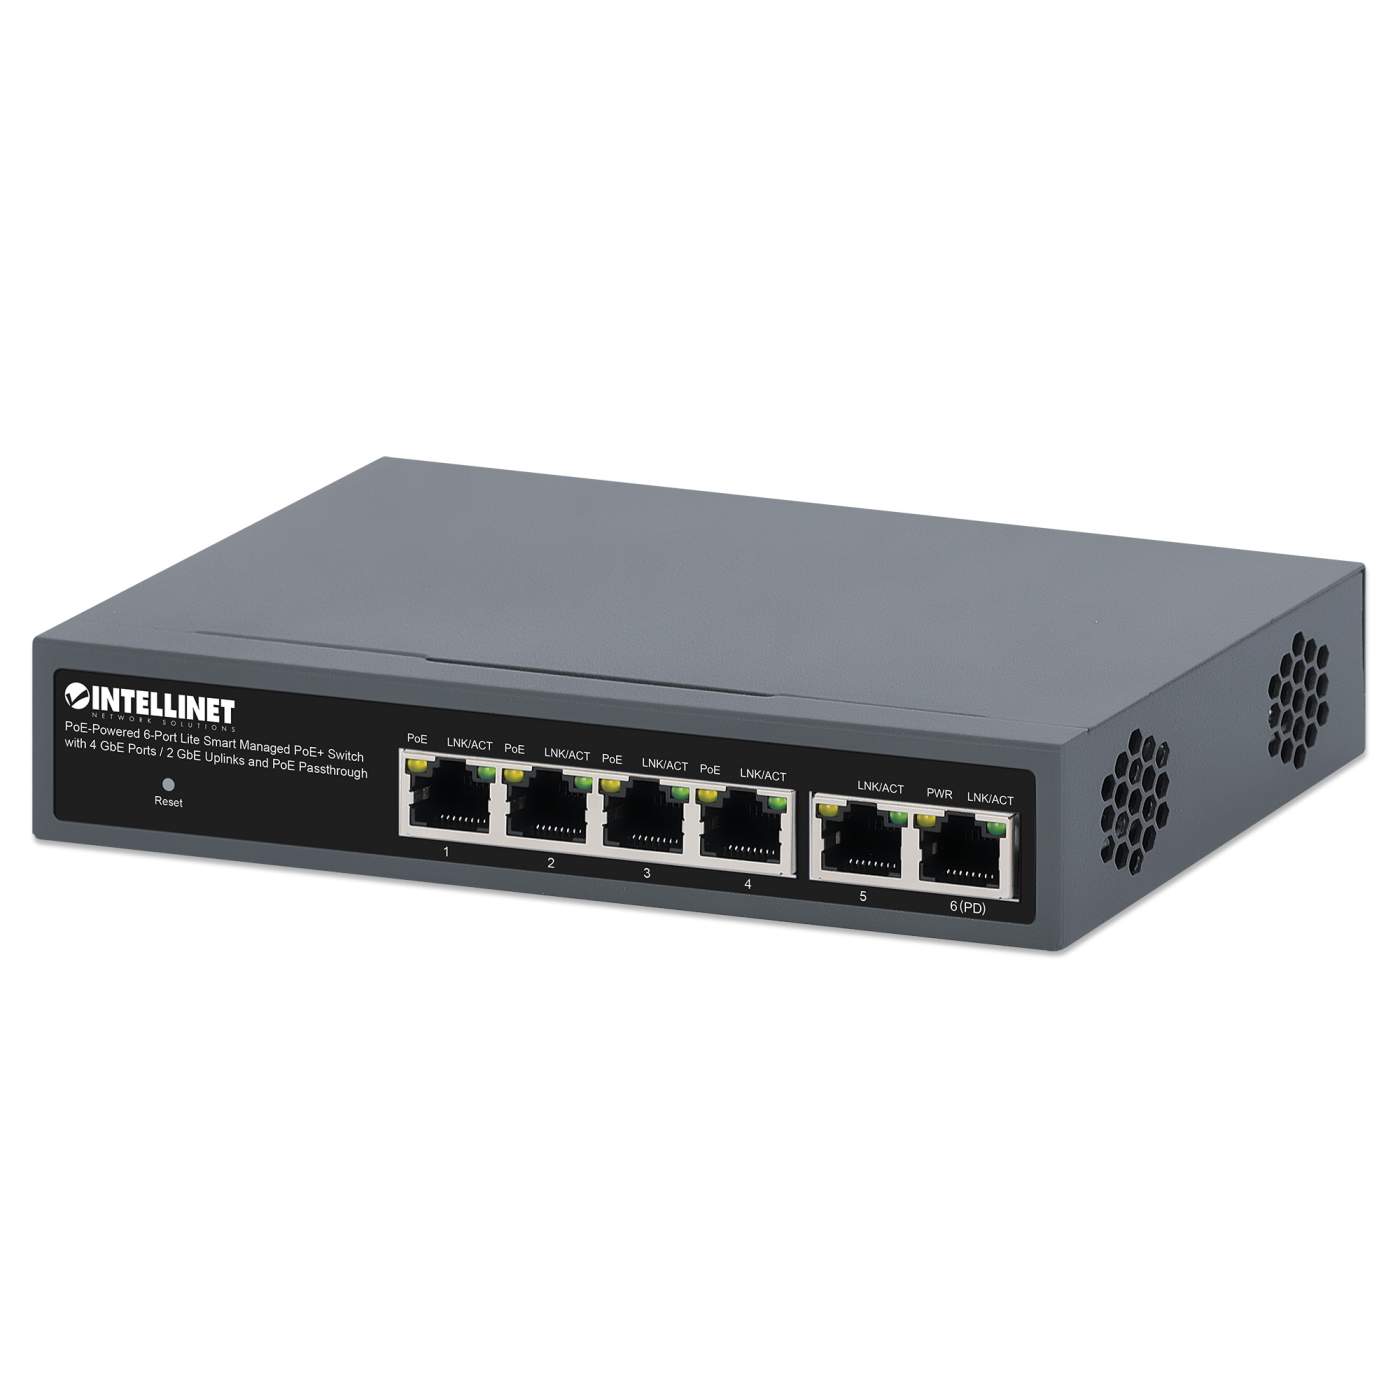 PoE-Powered 6-Port Lite Smart Managed PoE+ Switch with 4 GbE Ports / 2 GbE Uplinks and PoE Passthrough Image 1